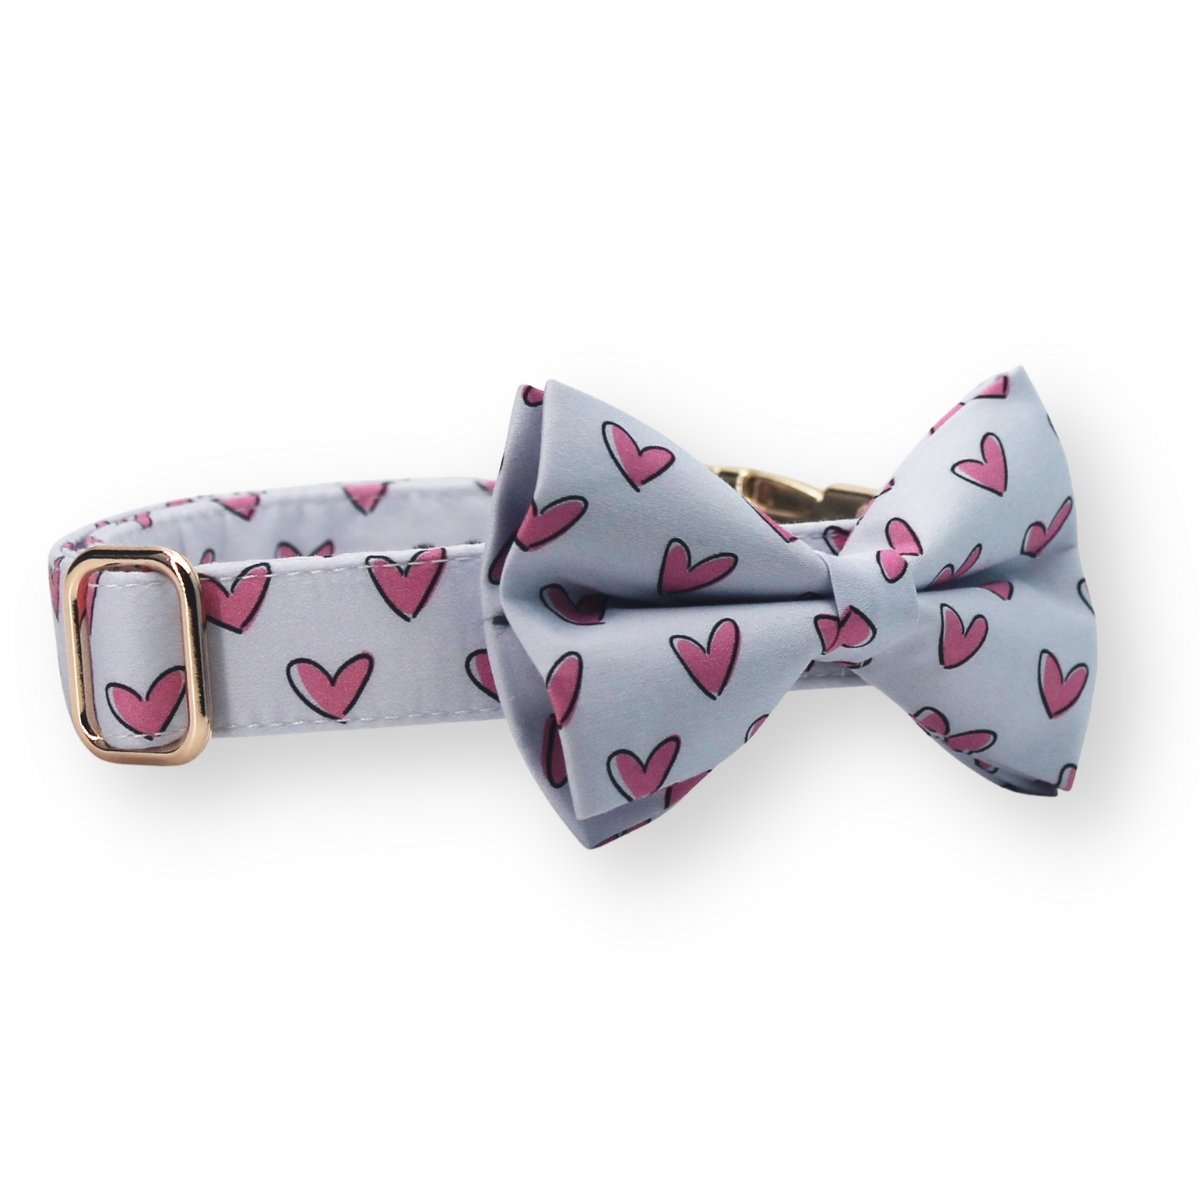 WHITE HEART Dog Collar With Cute Heart Patterns Adjustable 